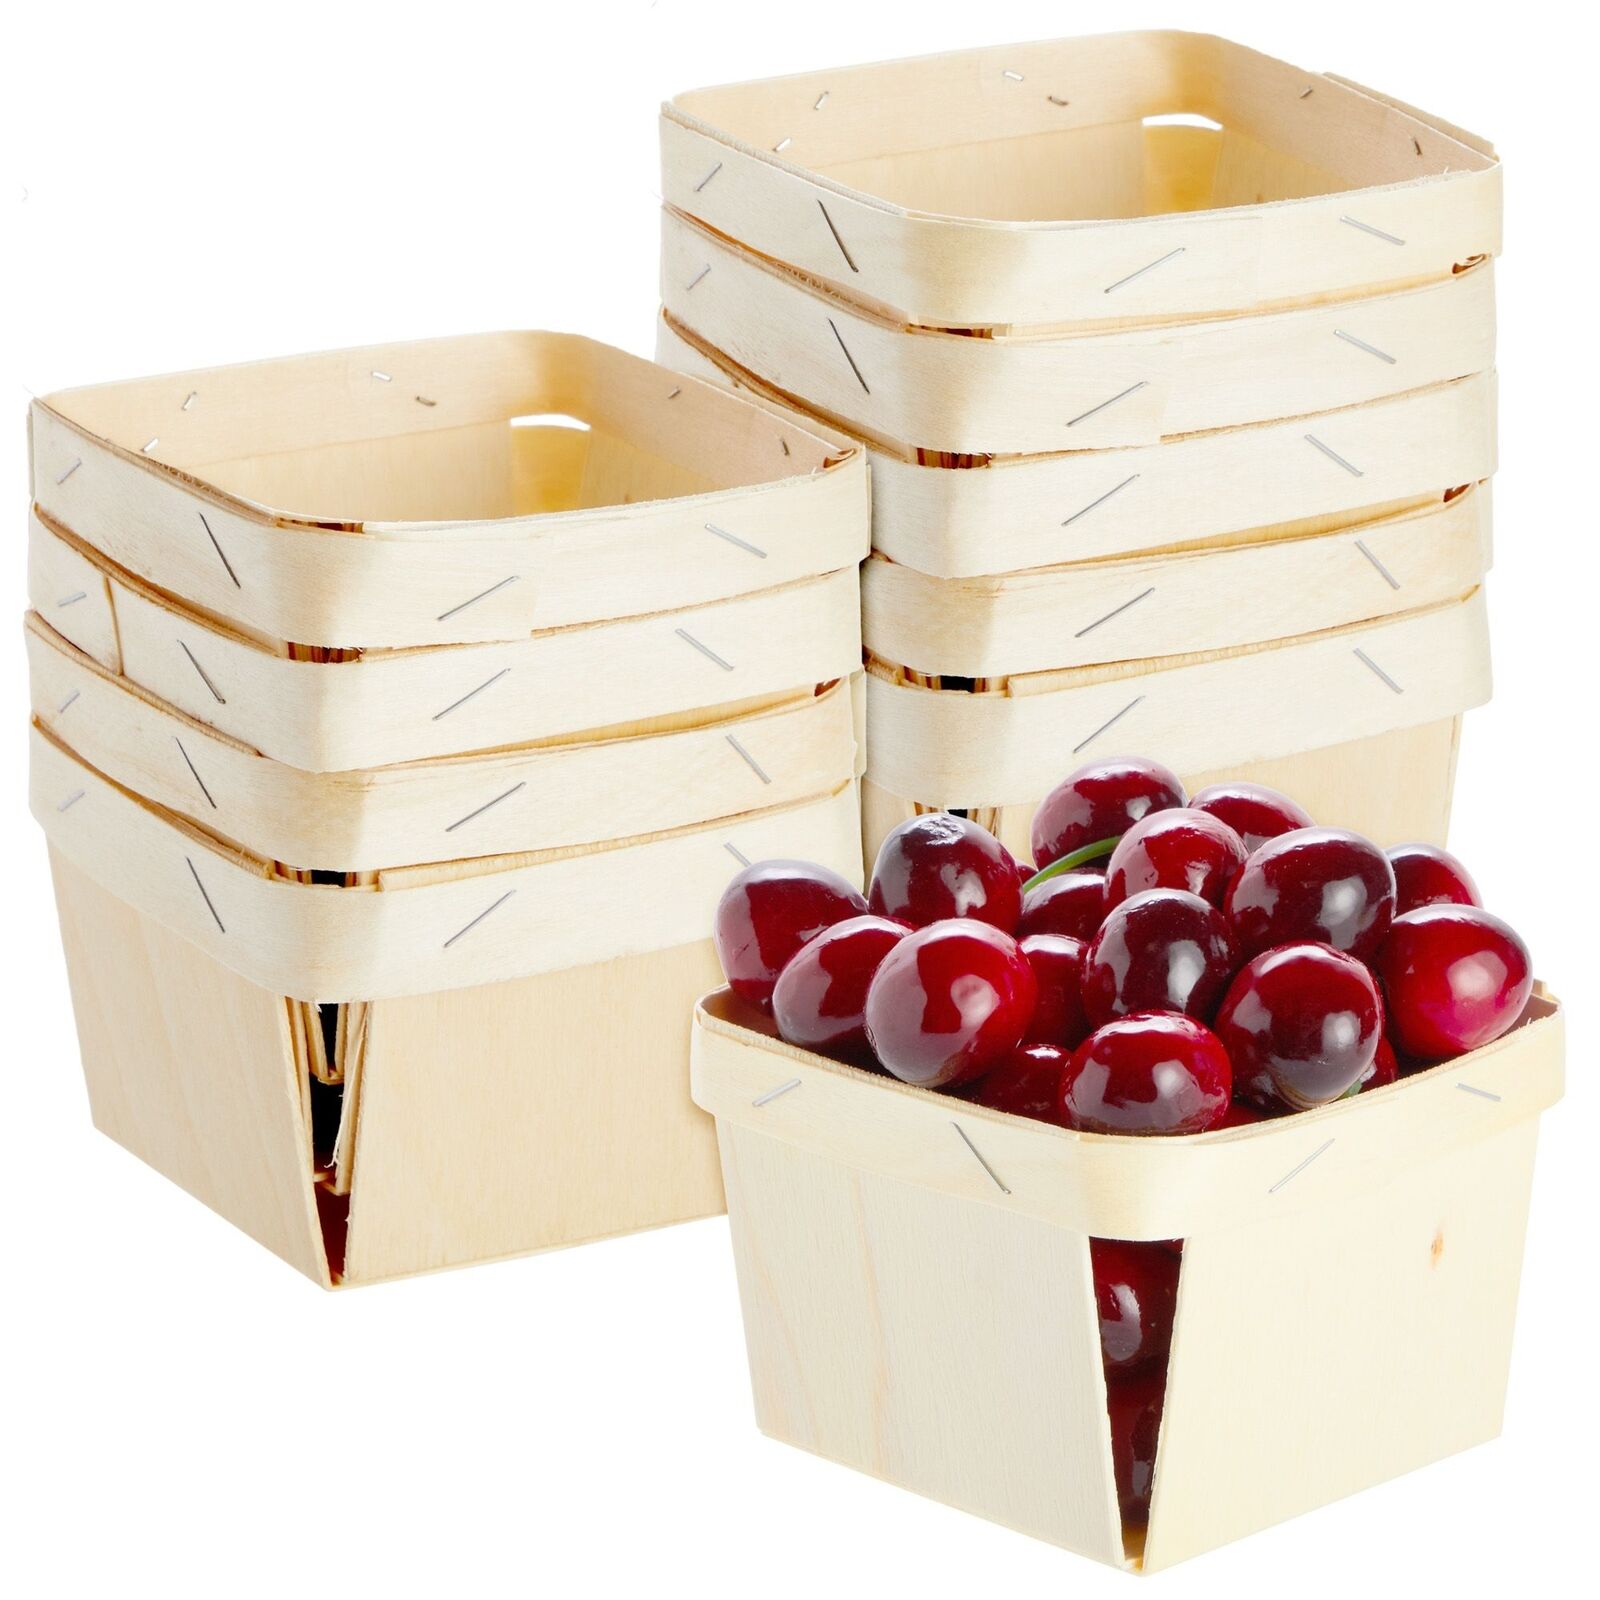 10 Pack 1-Pint Wooden Berry Baskets for Picking Fruit or Arts and Crafts, 4 in